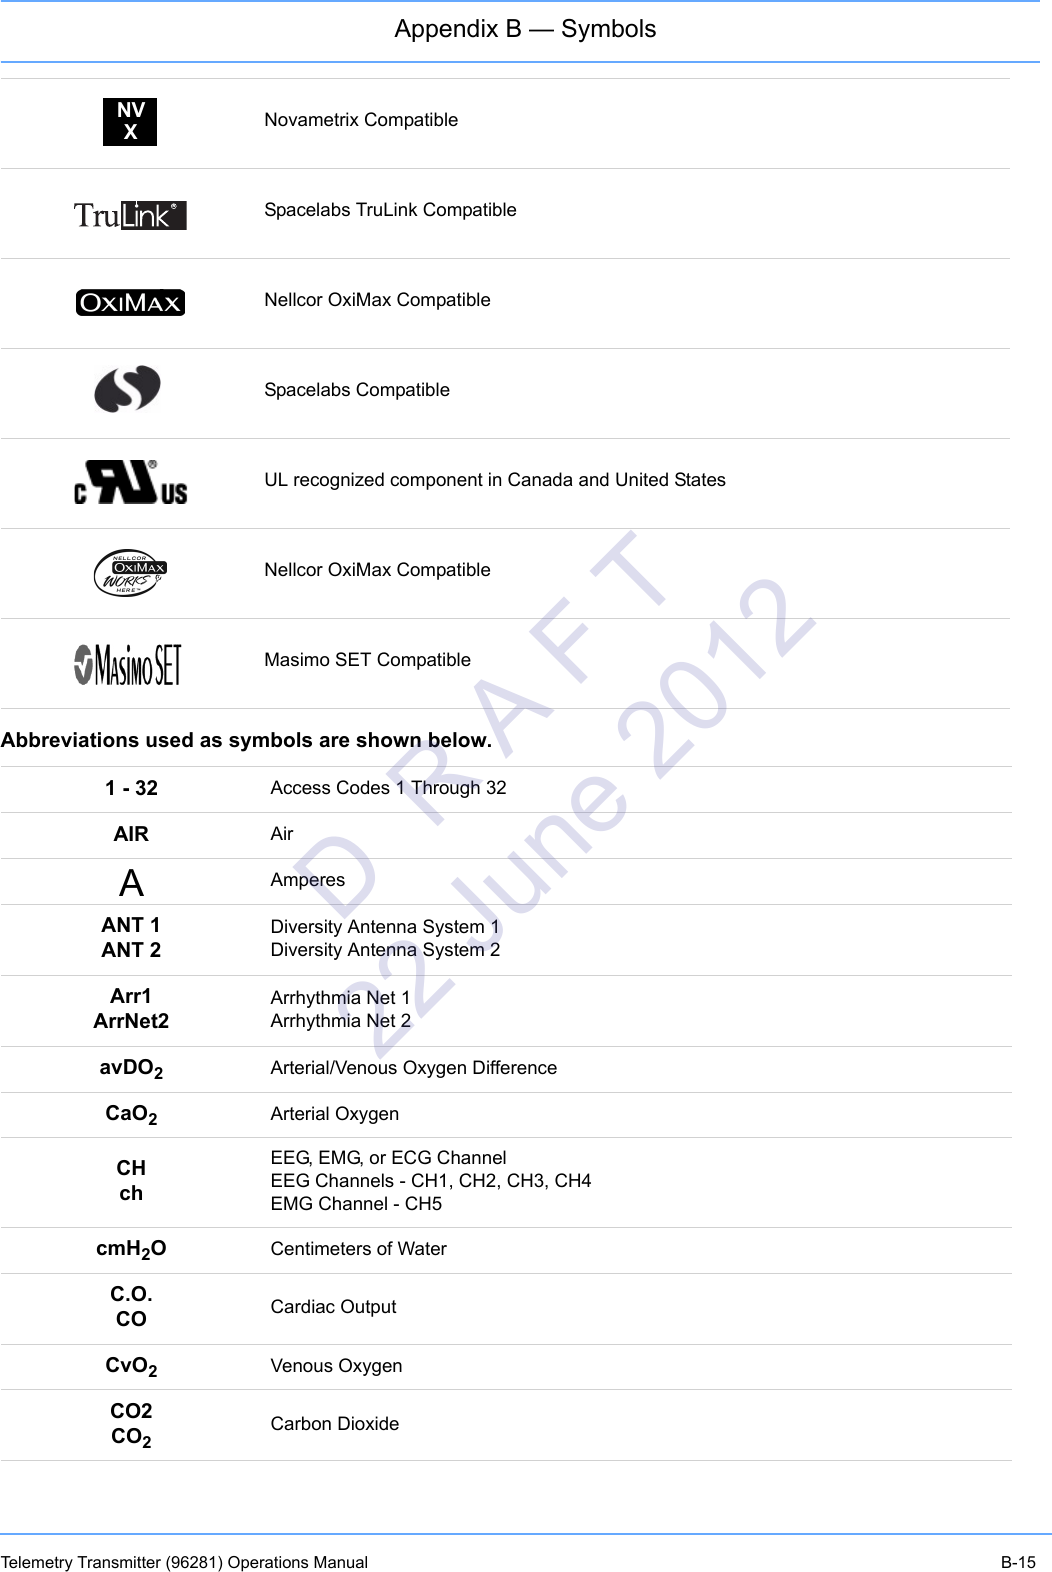 Appendix B — SymbolsTelemetry Transmitter (96281) Operations Manual B-15Abbreviations used as symbols are shown below.Novametrix CompatibleSpacelabs TruLink CompatibleNellcor OxiMax CompatibleSpacelabs CompatibleUL recognized component in Canada and United StatesNellcor OxiMax CompatibleMasimo SET Compatible1 - 32 Access Codes 1 Through 32AIR AirAmperesANT 1ANT 2Diversity Antenna System 1Diversity Antenna System 2Arr1ArrNet2Arrhythmia Net 1Arrhythmia Net 2avDO2Arterial/Venous Oxygen DifferenceCaO2Arterial OxygenCHchEEG, EMG, or ECG ChannelEEG Channels - CH1, CH2, CH3, CH4EMG Channel - CH5cmH2OCentimeters of WaterC.O.CO Cardiac OutputCvO2Venous OxygenCO2CO2Carbon DioxideNVXRAD  R A F T 22 June 2012